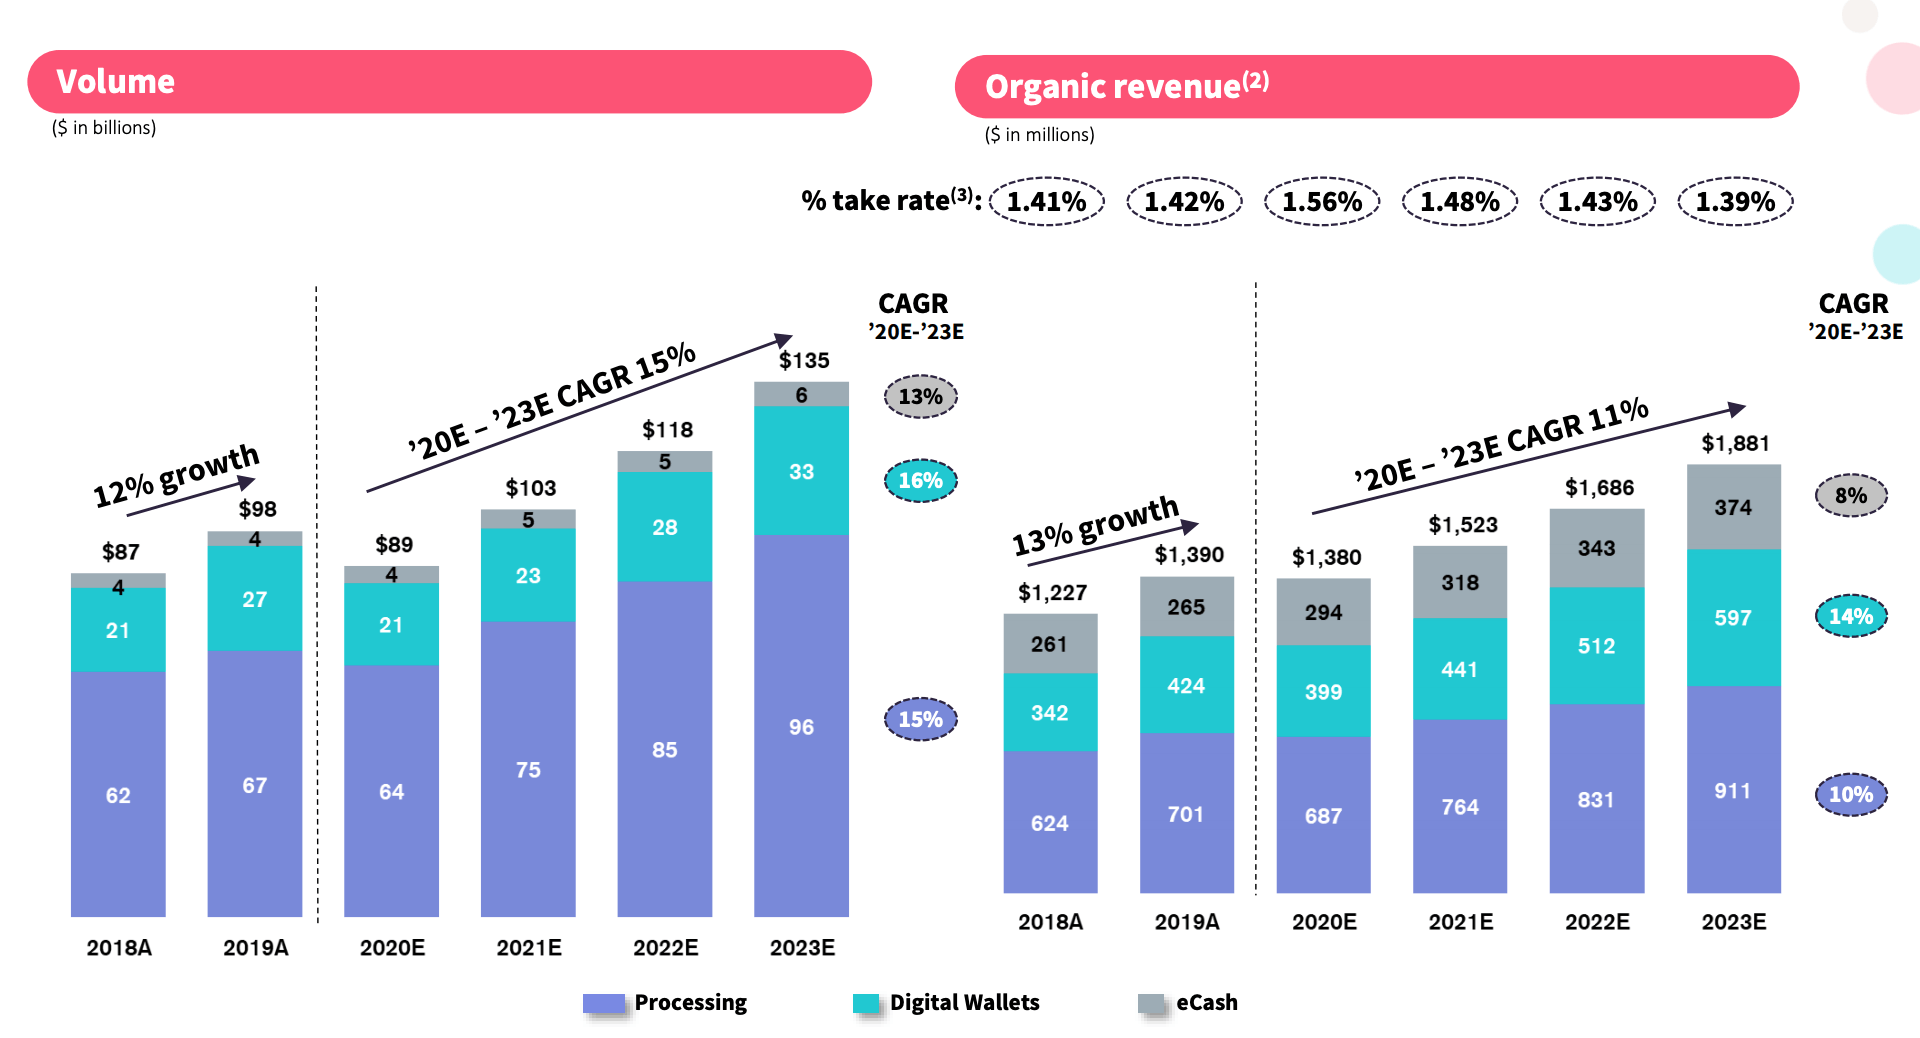 Paysafe revenue and volume growth